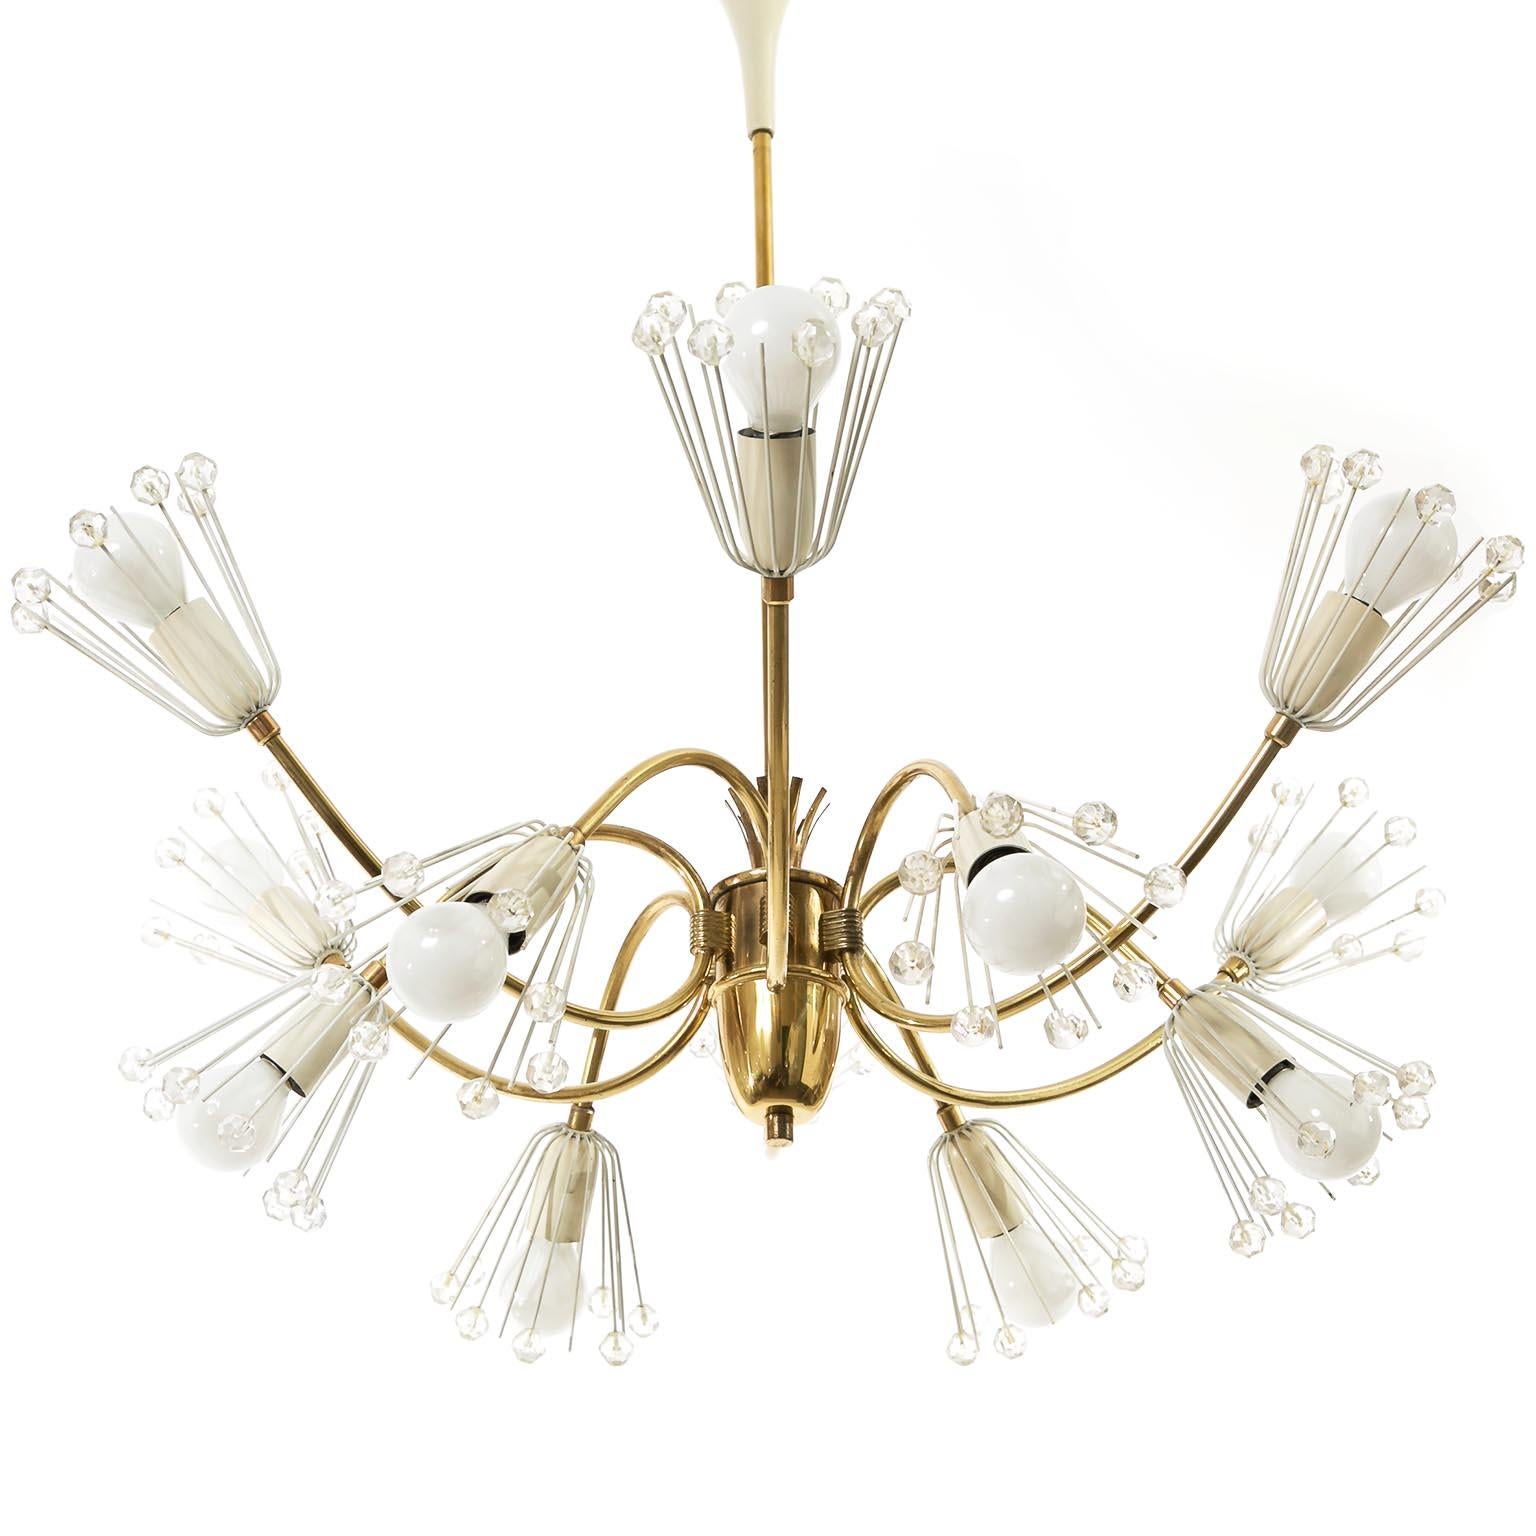 A beautiful 'Snowflake' chandelier / pendant light by Emil Stejnar for Rupert Nikoll, Austria, Vienna, manufactured in midcentury, circa 1950.
It is made of brass with nice patina on it, white lacquered metal and hand-cut crystal glass. The fixture